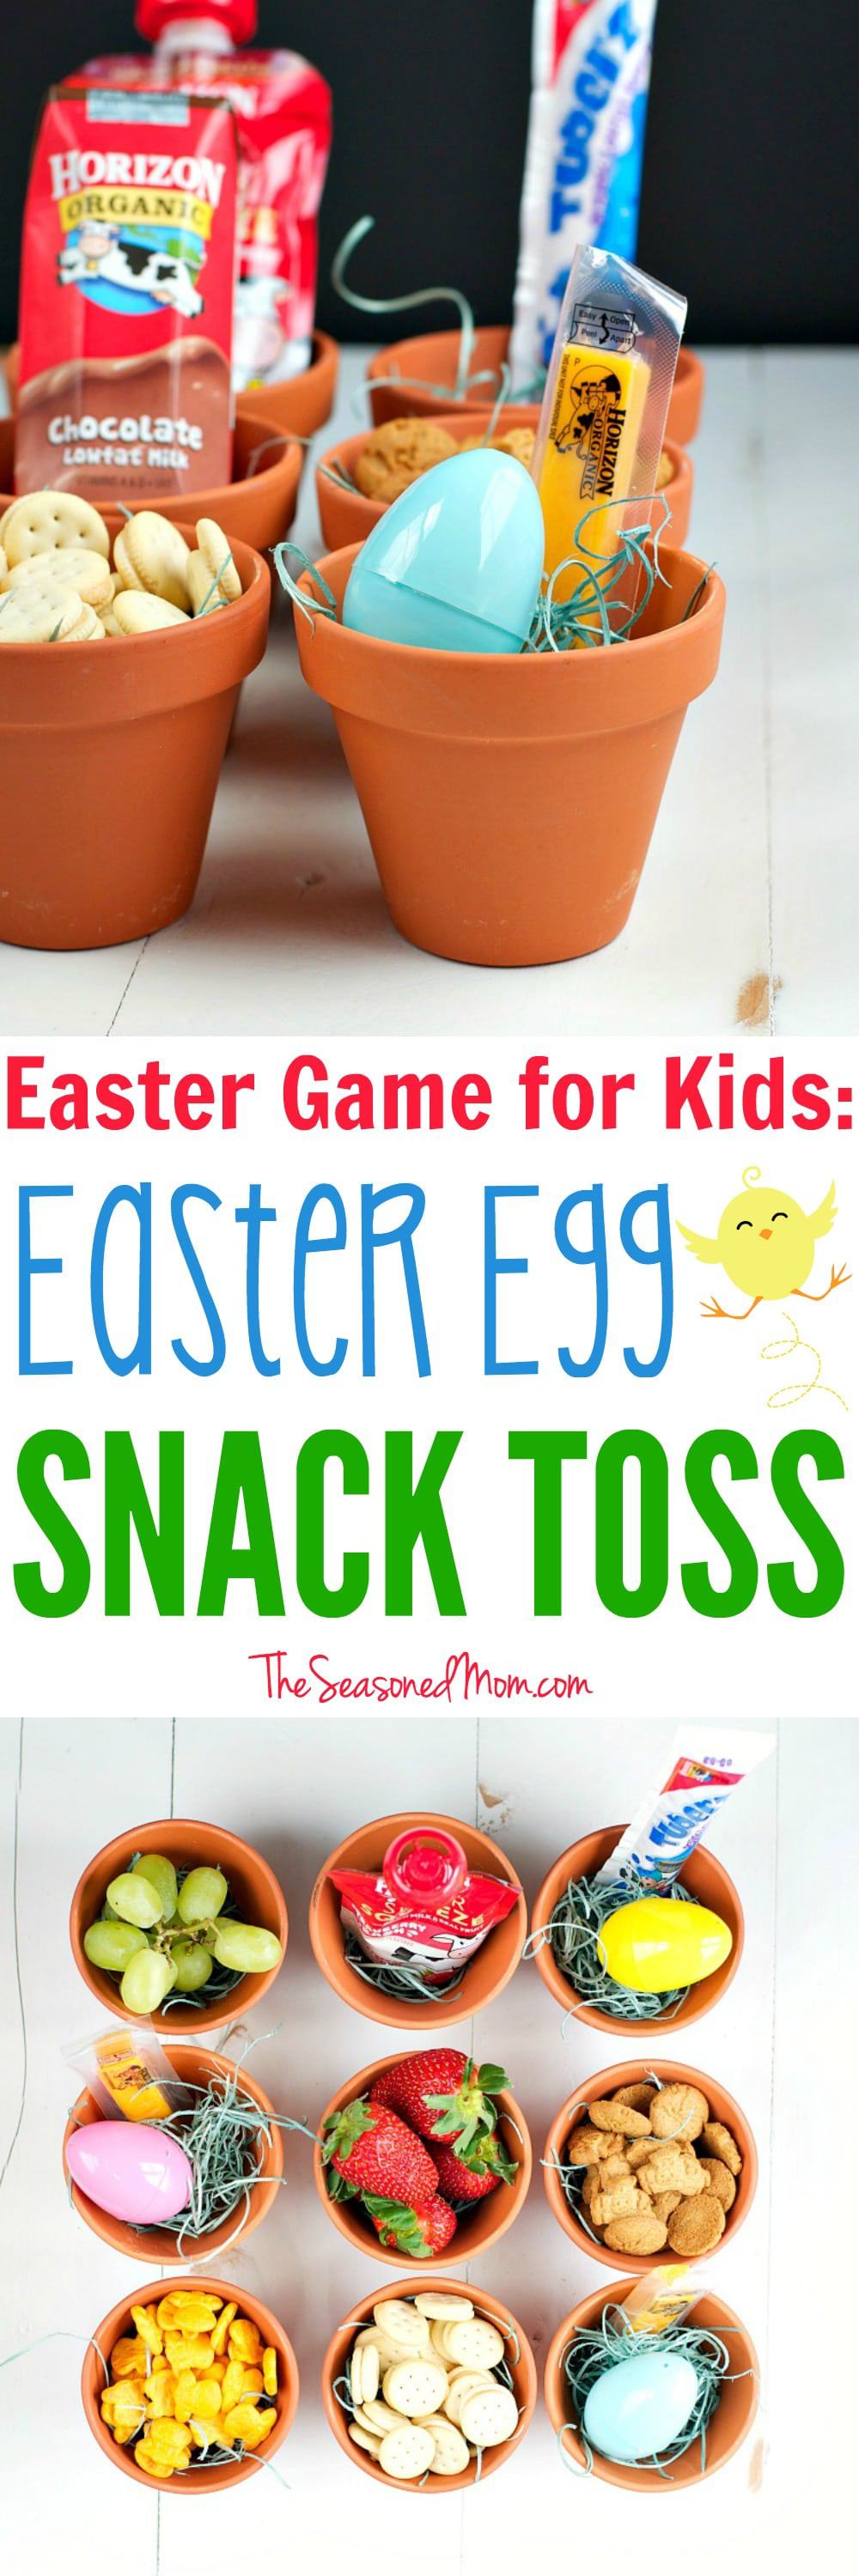 An Easter Egg Snack Toss is an easy Easter Game for Kids -- and it will keep the youngsters active and energized throughout the holiday!